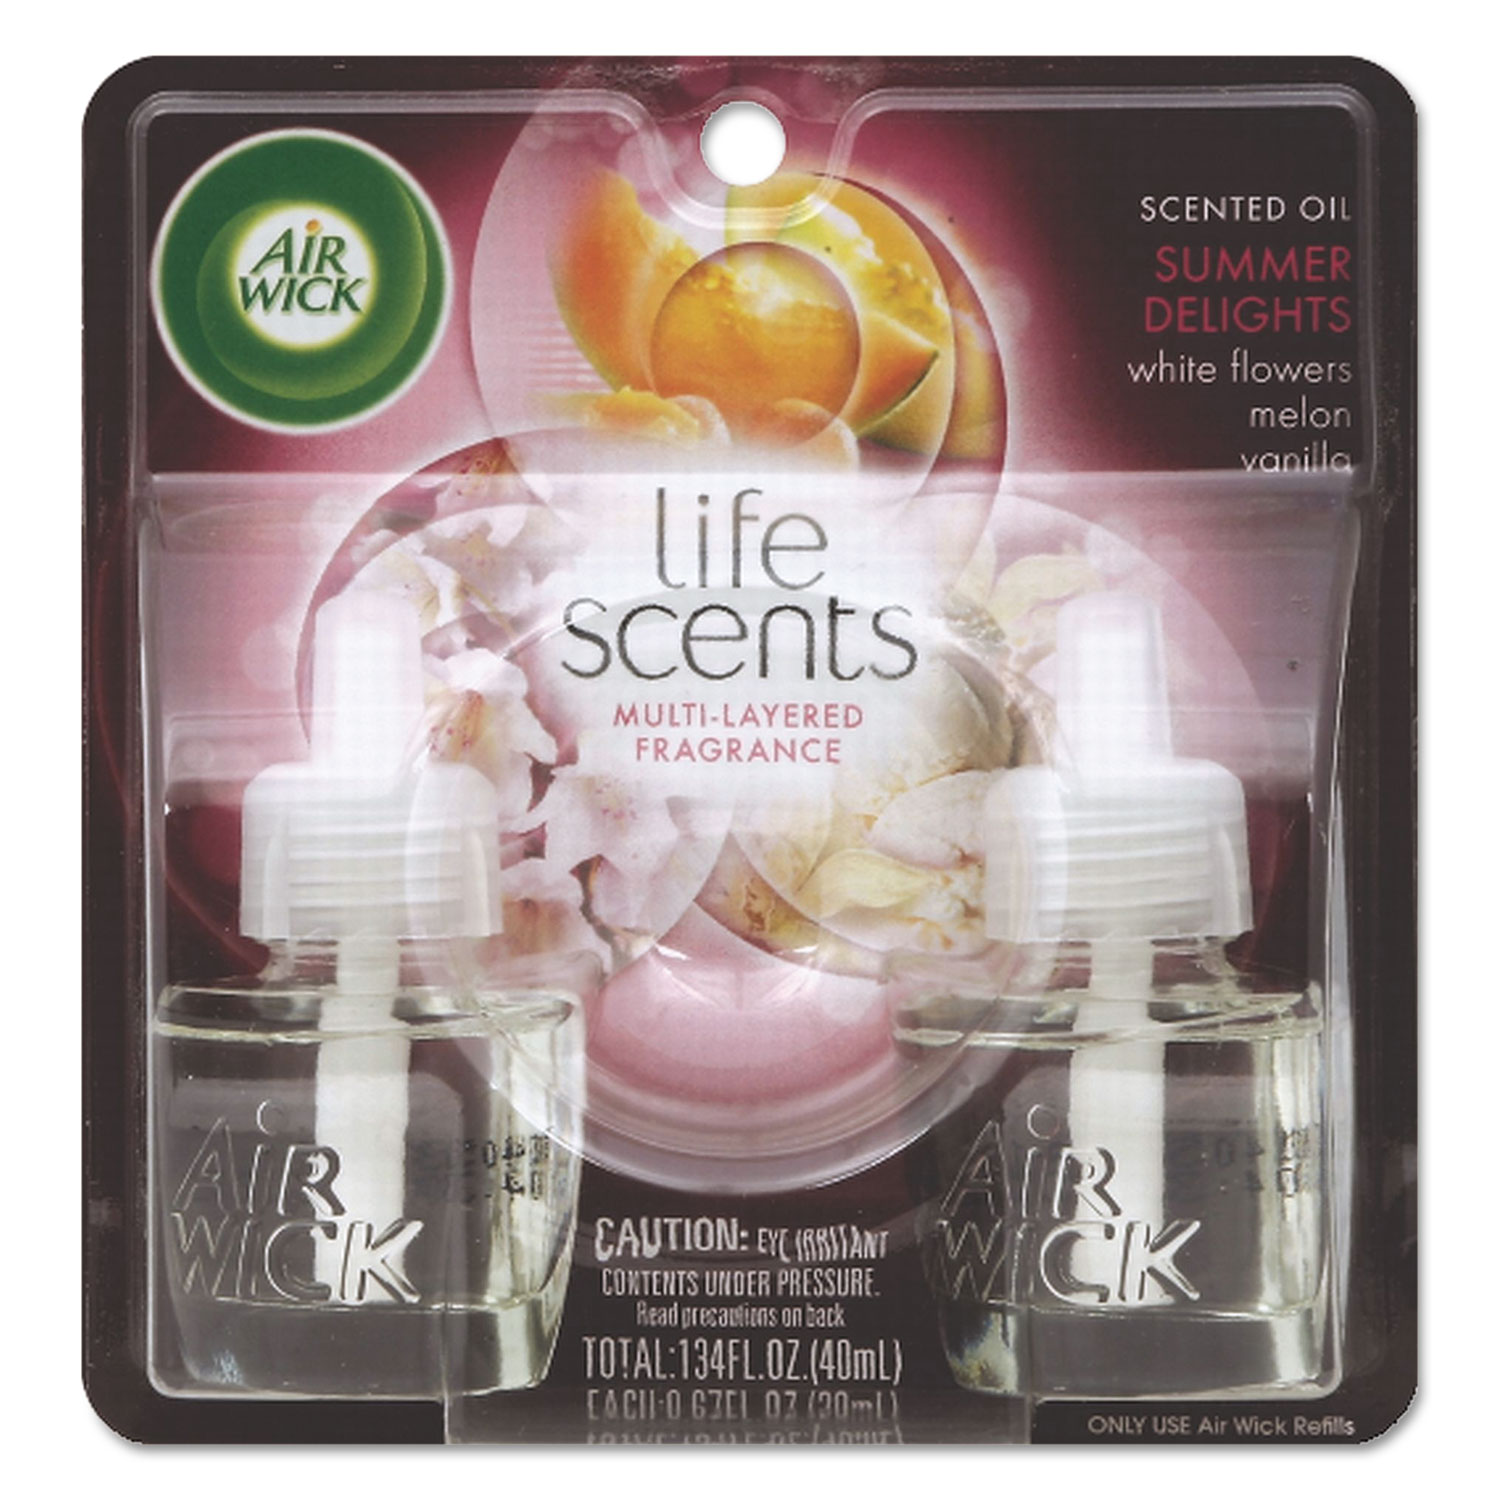 Life Scents Scented Oil Refills, Summer Delights, 0.67 oz, 2/Pack